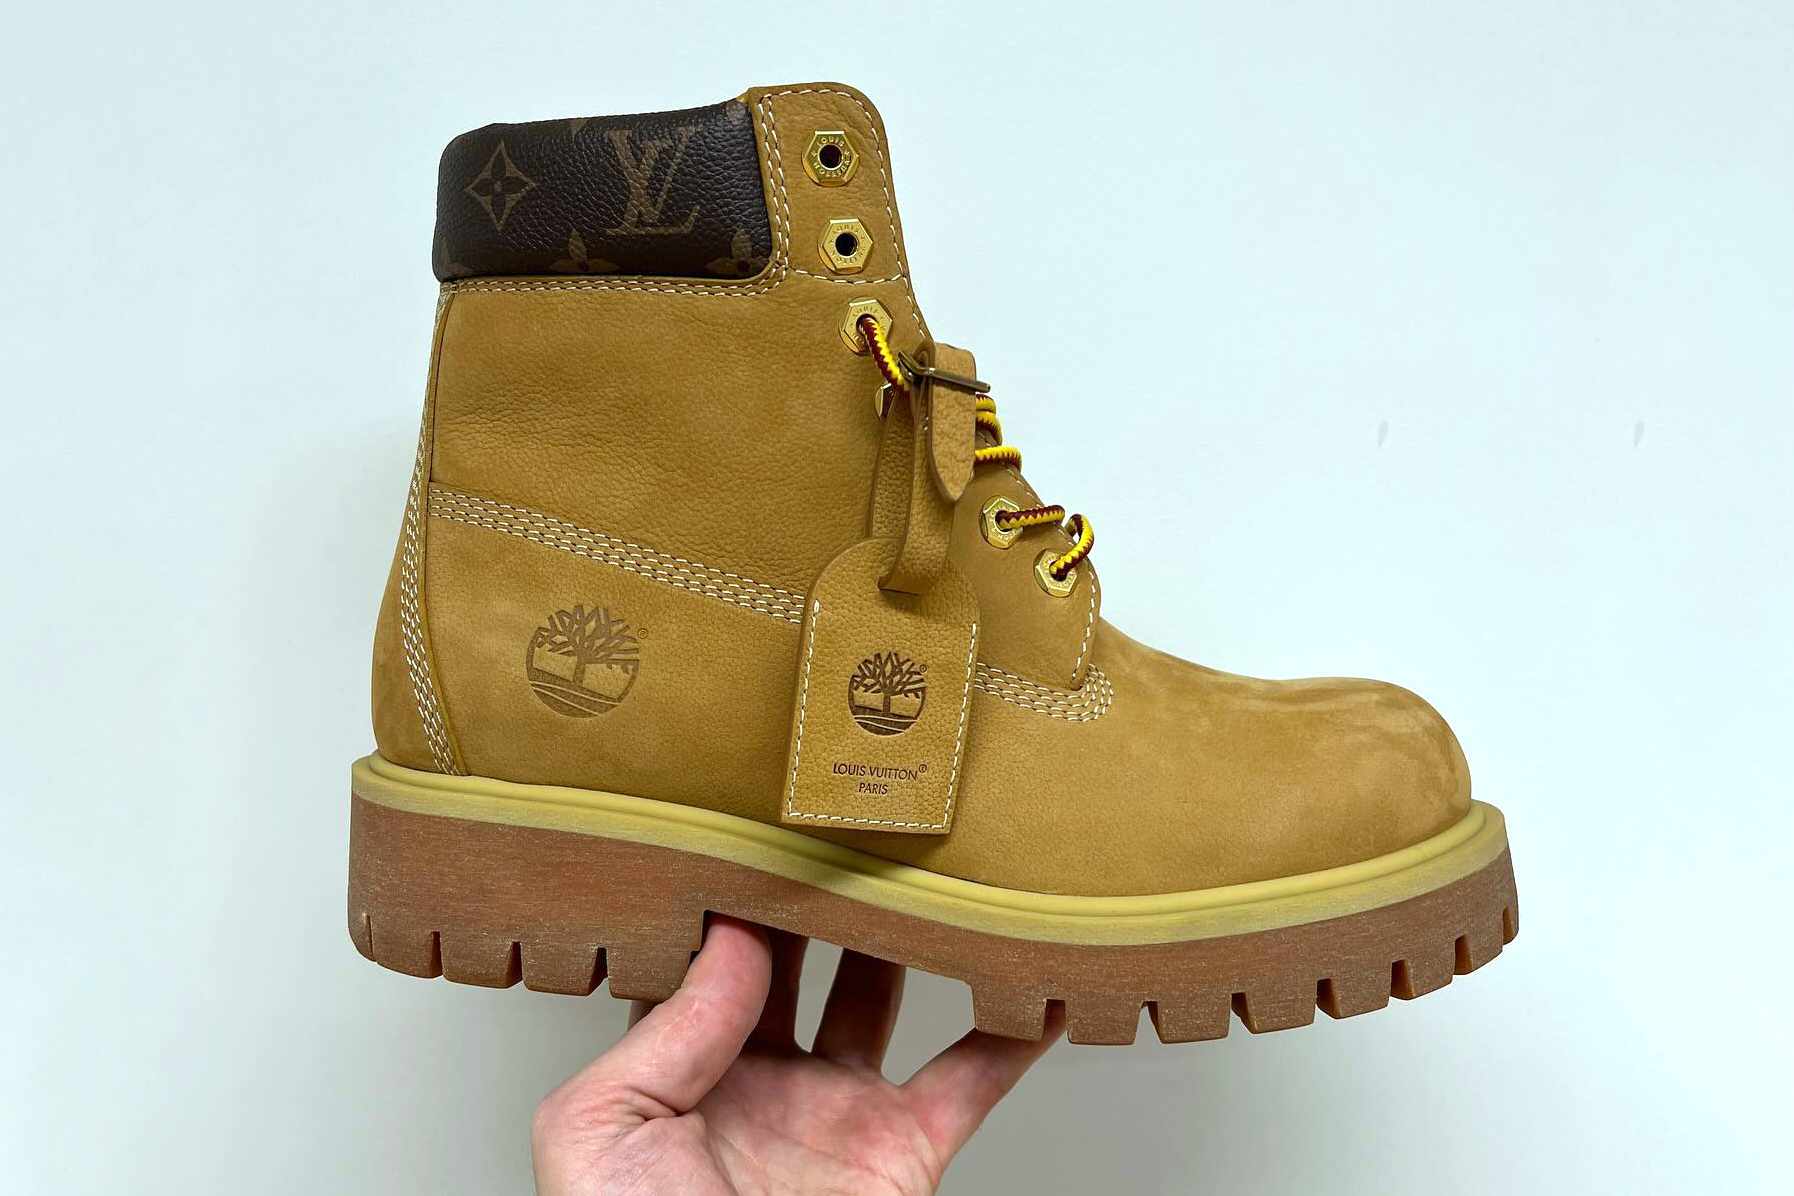 Louis Vuitton's Timberland 6" boot collaboration in wheat leather